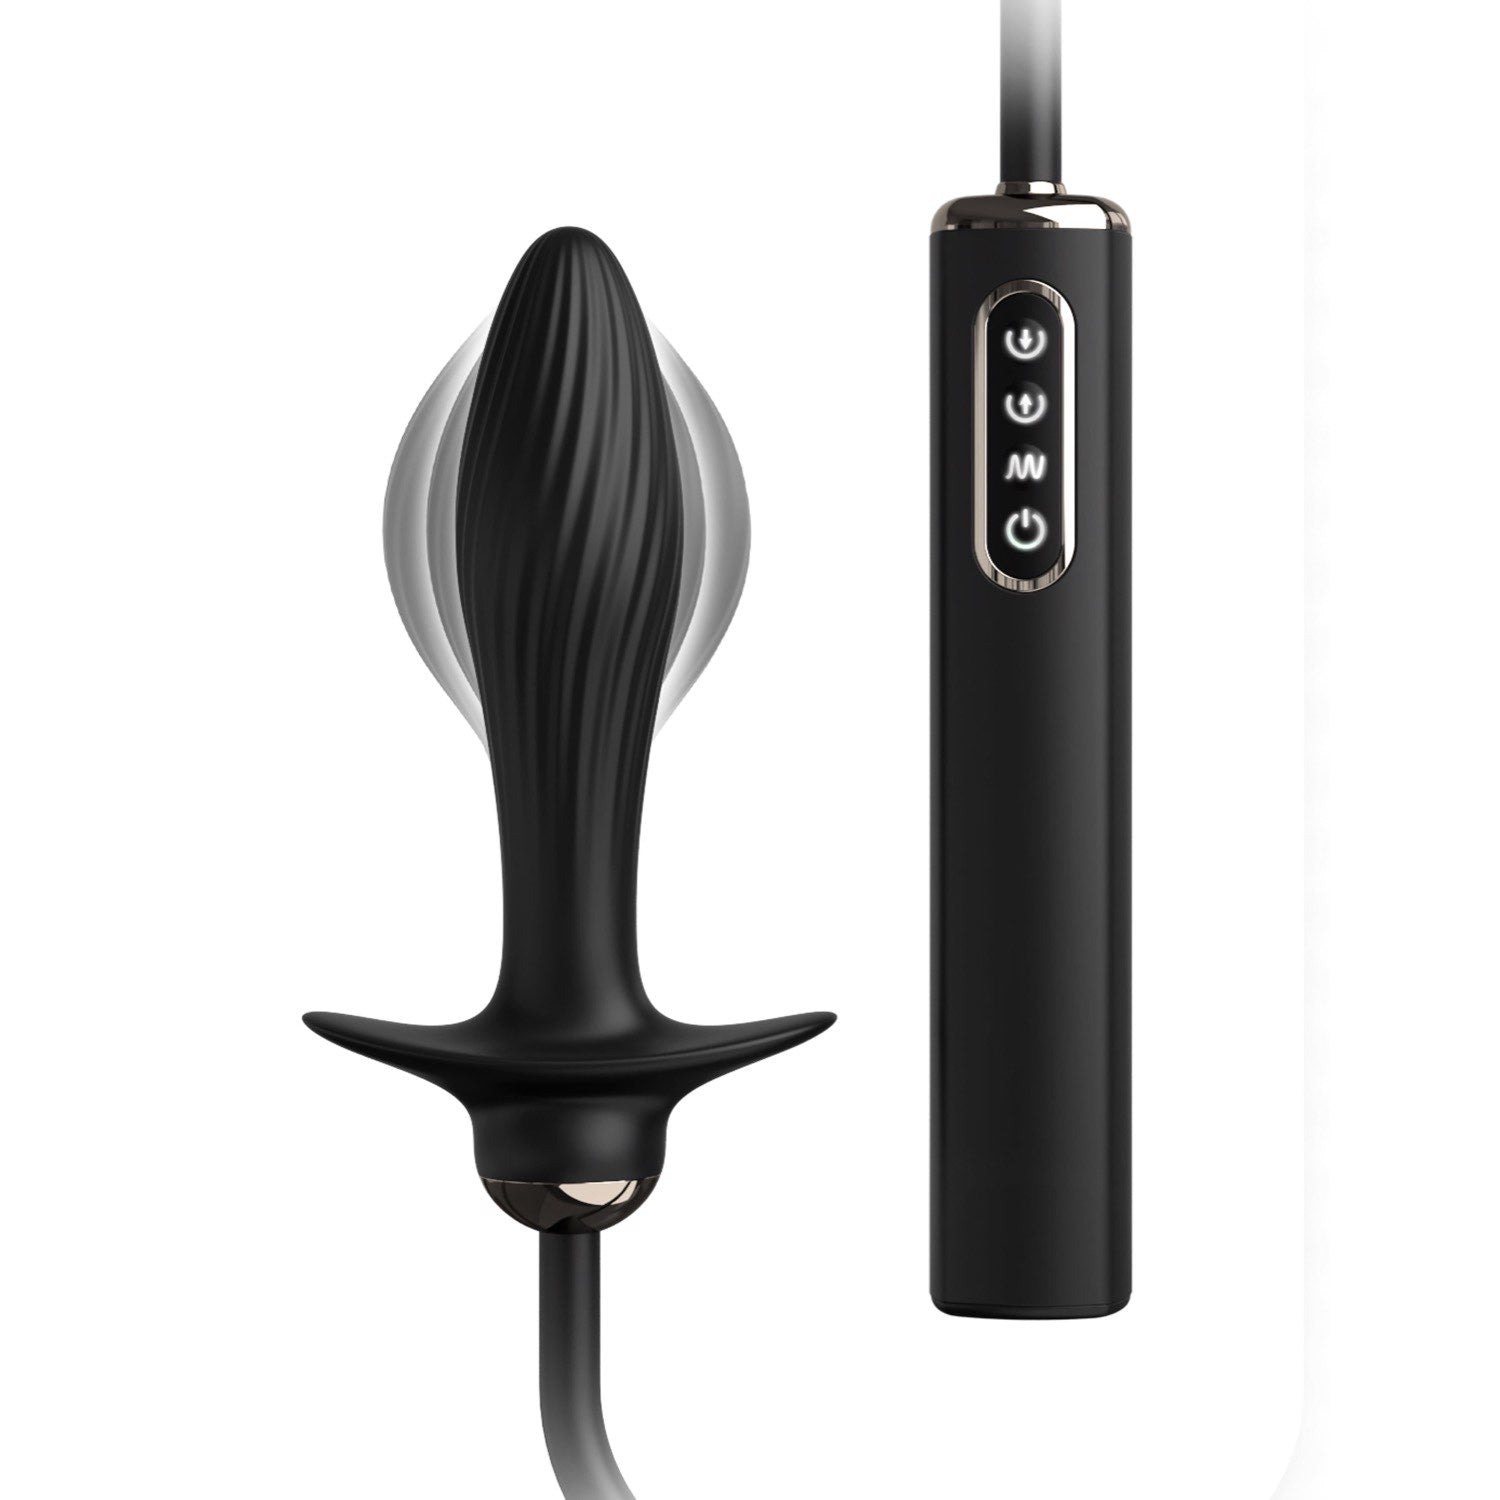 Anal Fantasy Elite Auto Throb Inflatable Vibrating Plug - Black 13 cm USB Rechargeable Inflatating Butt Plug by Pipedream